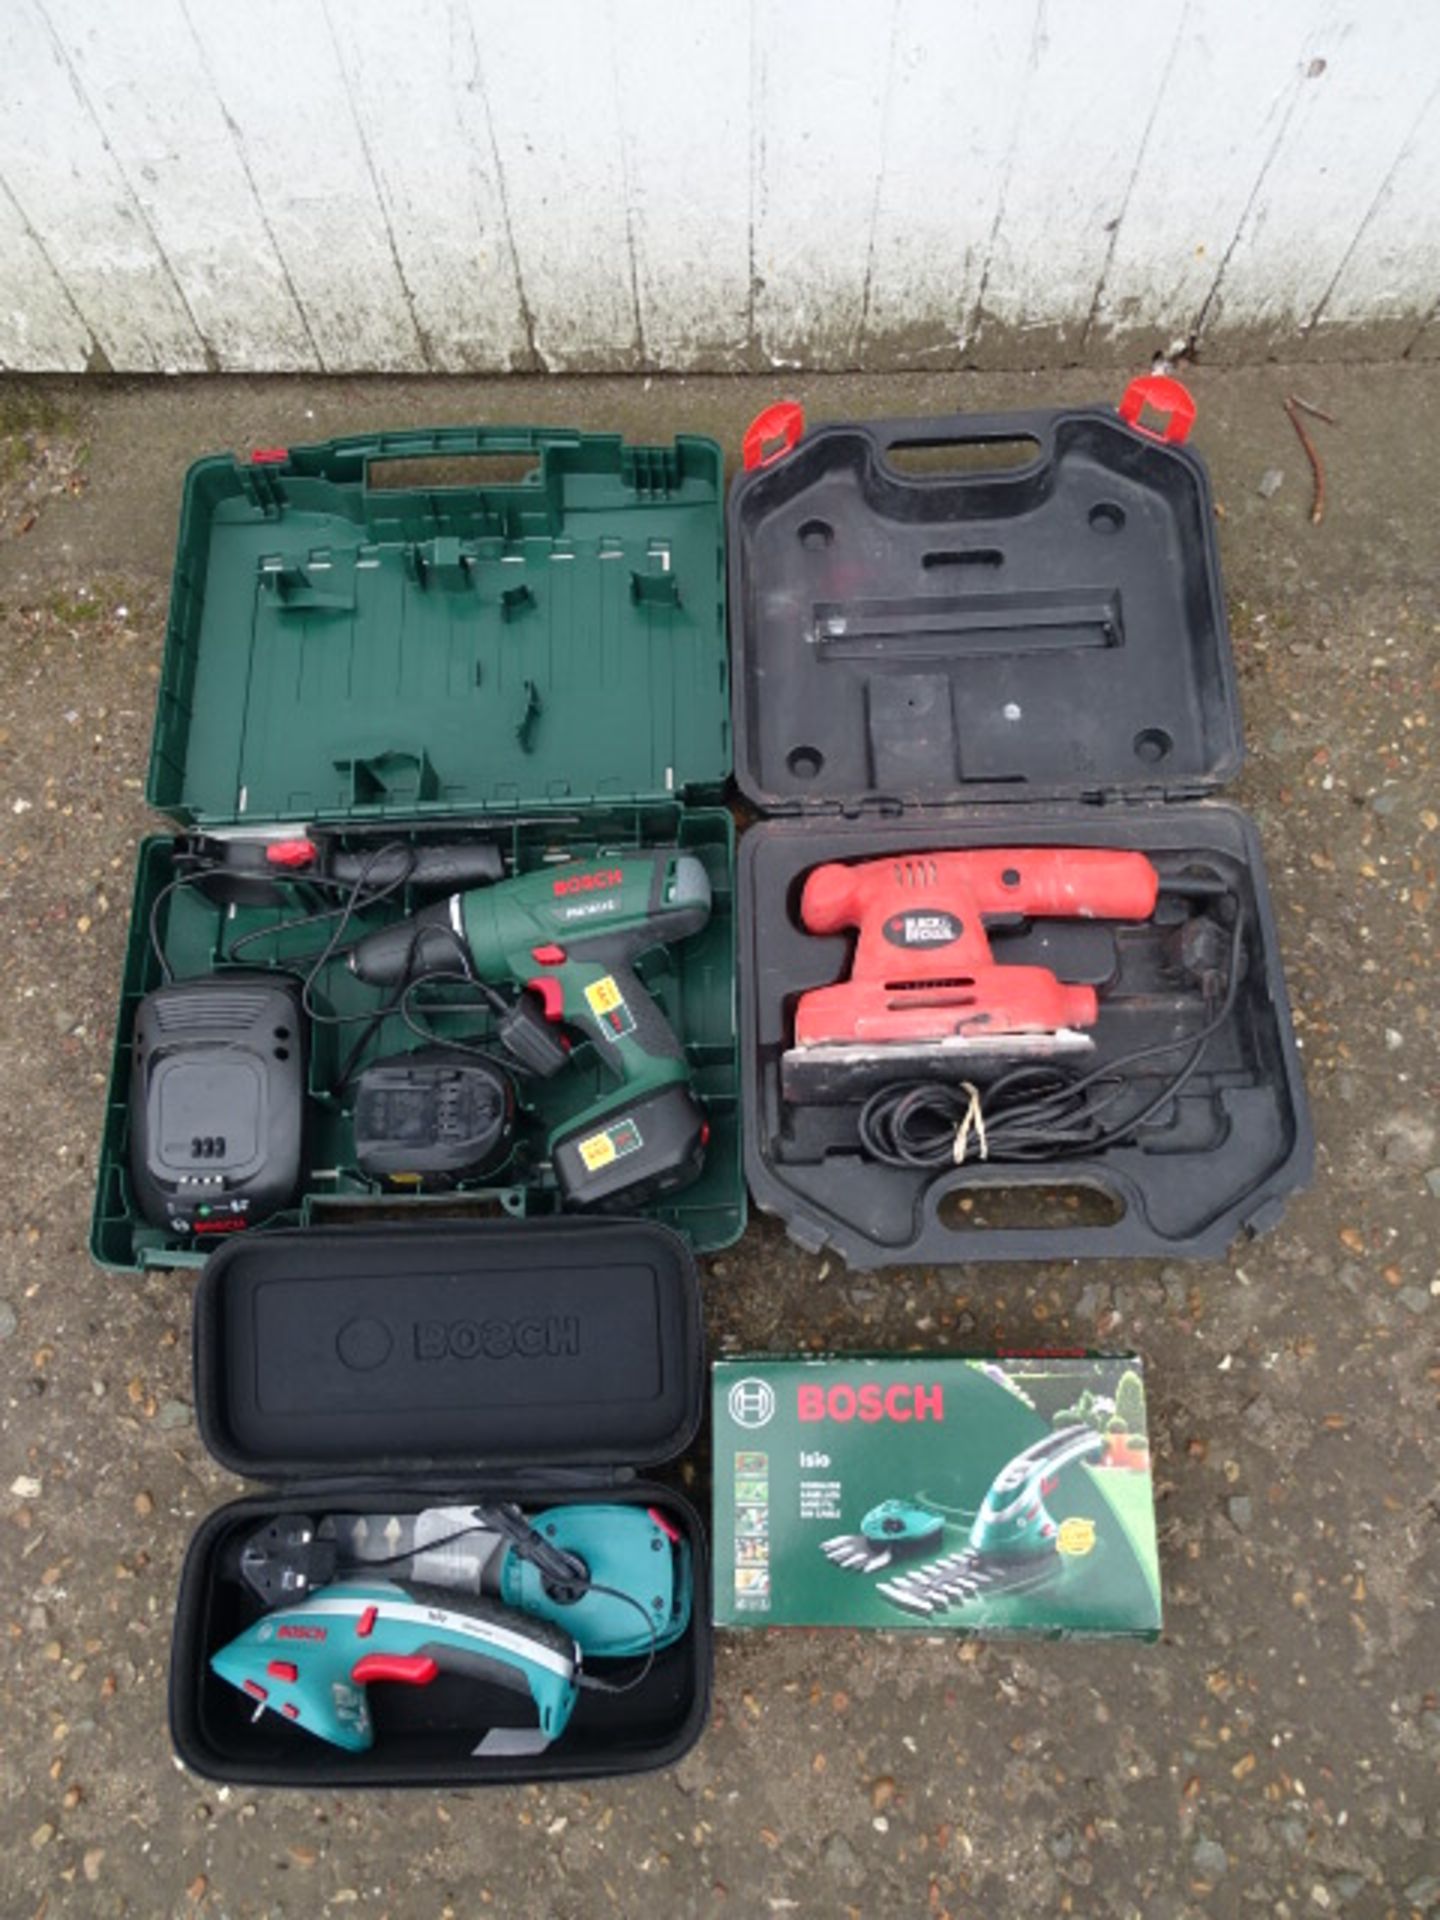 Bosch cordless lithium drill, garden trimmer and Black & Decker sander, all from a house clearance